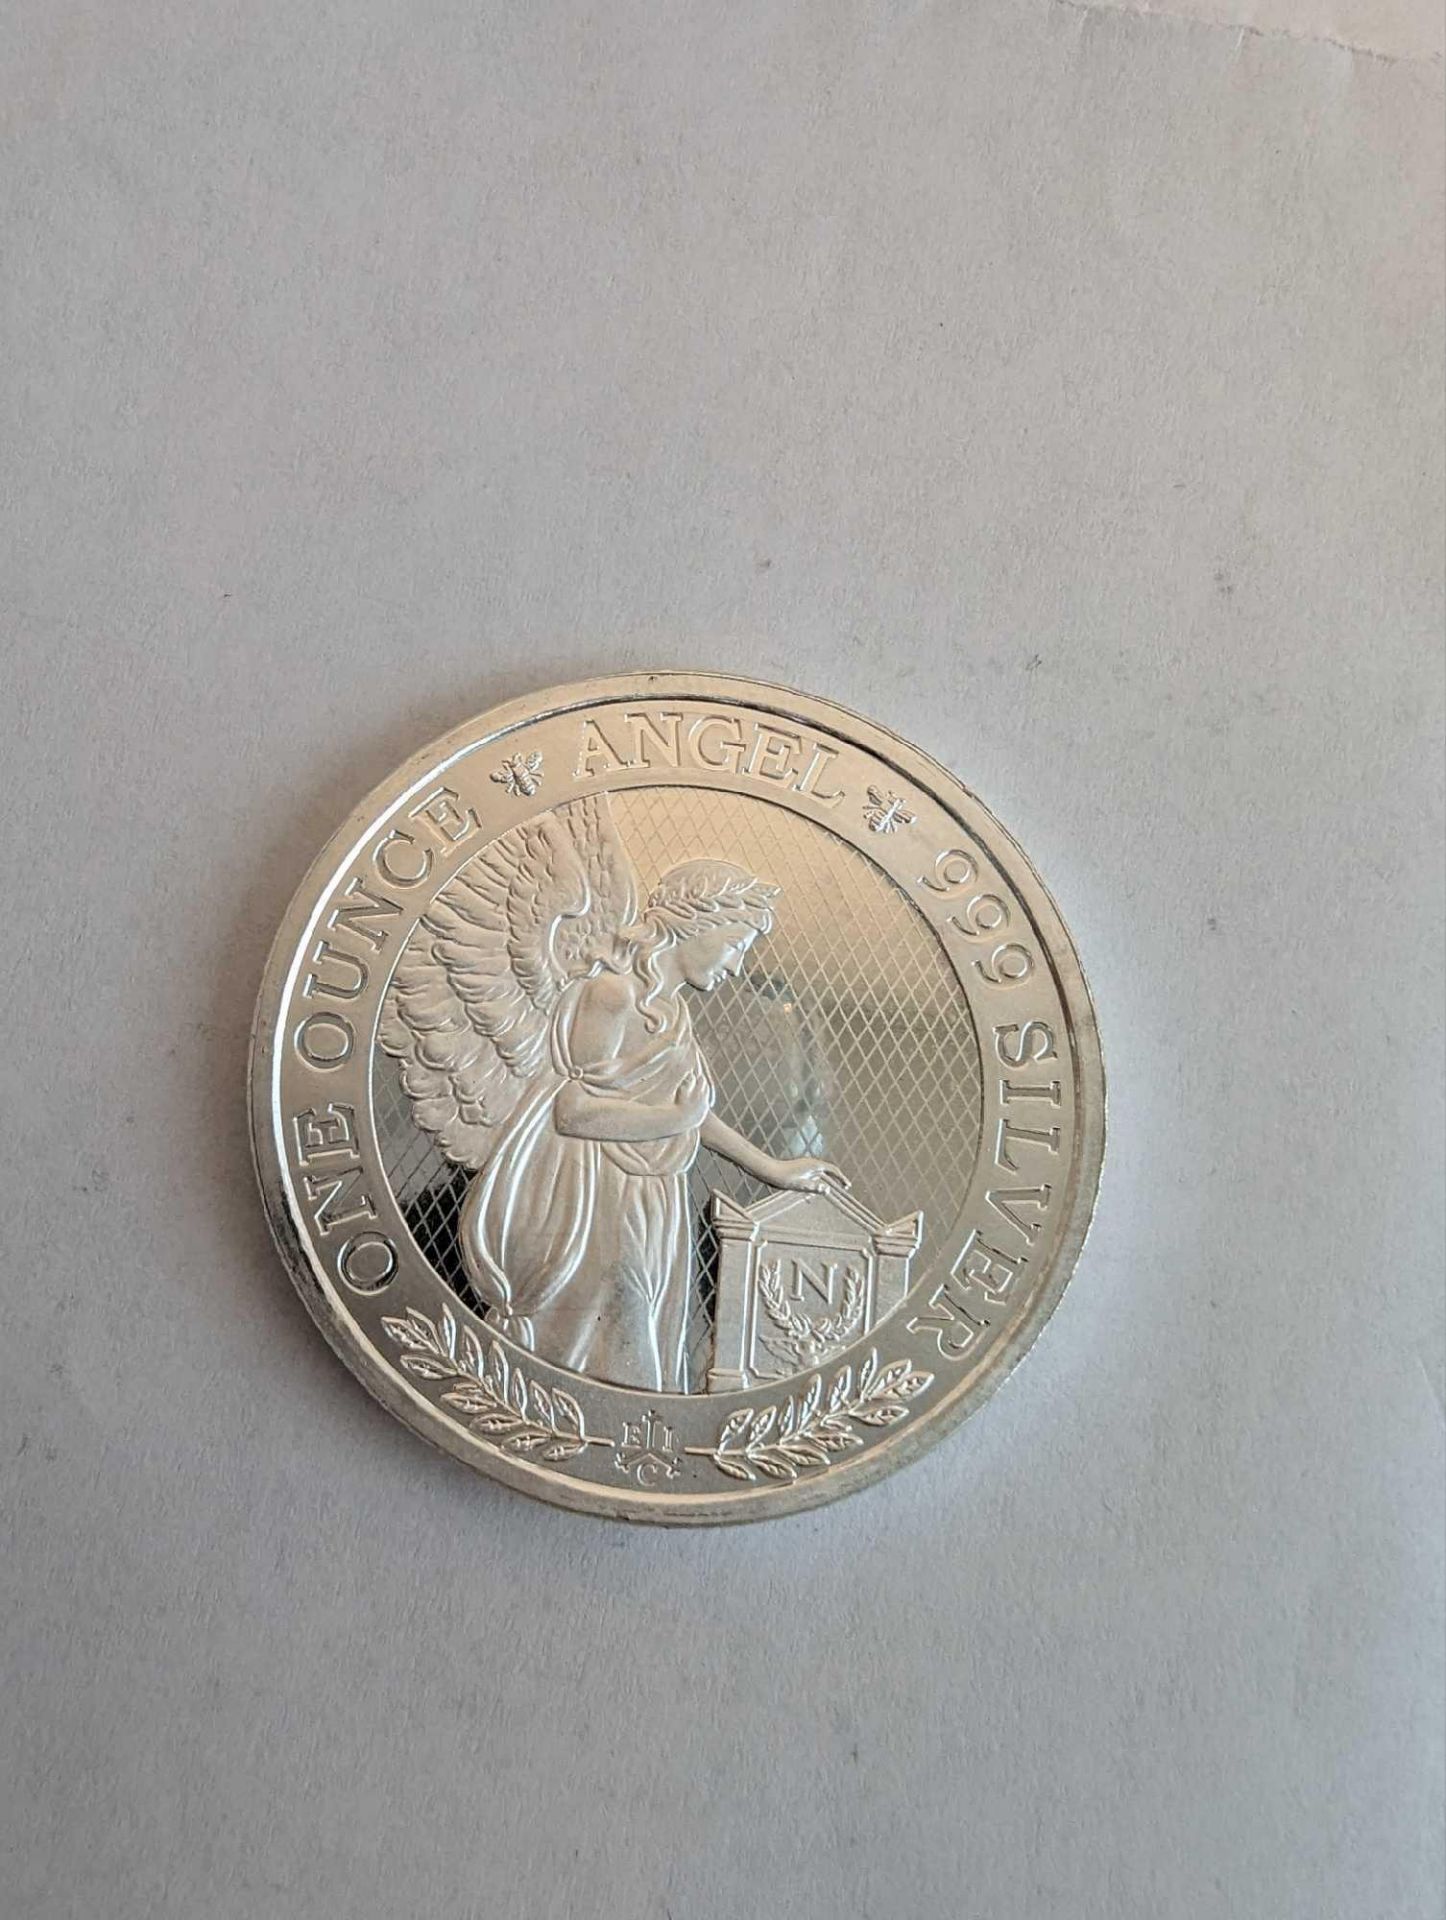 2021 st Helena angel silver coin - Image 2 of 2